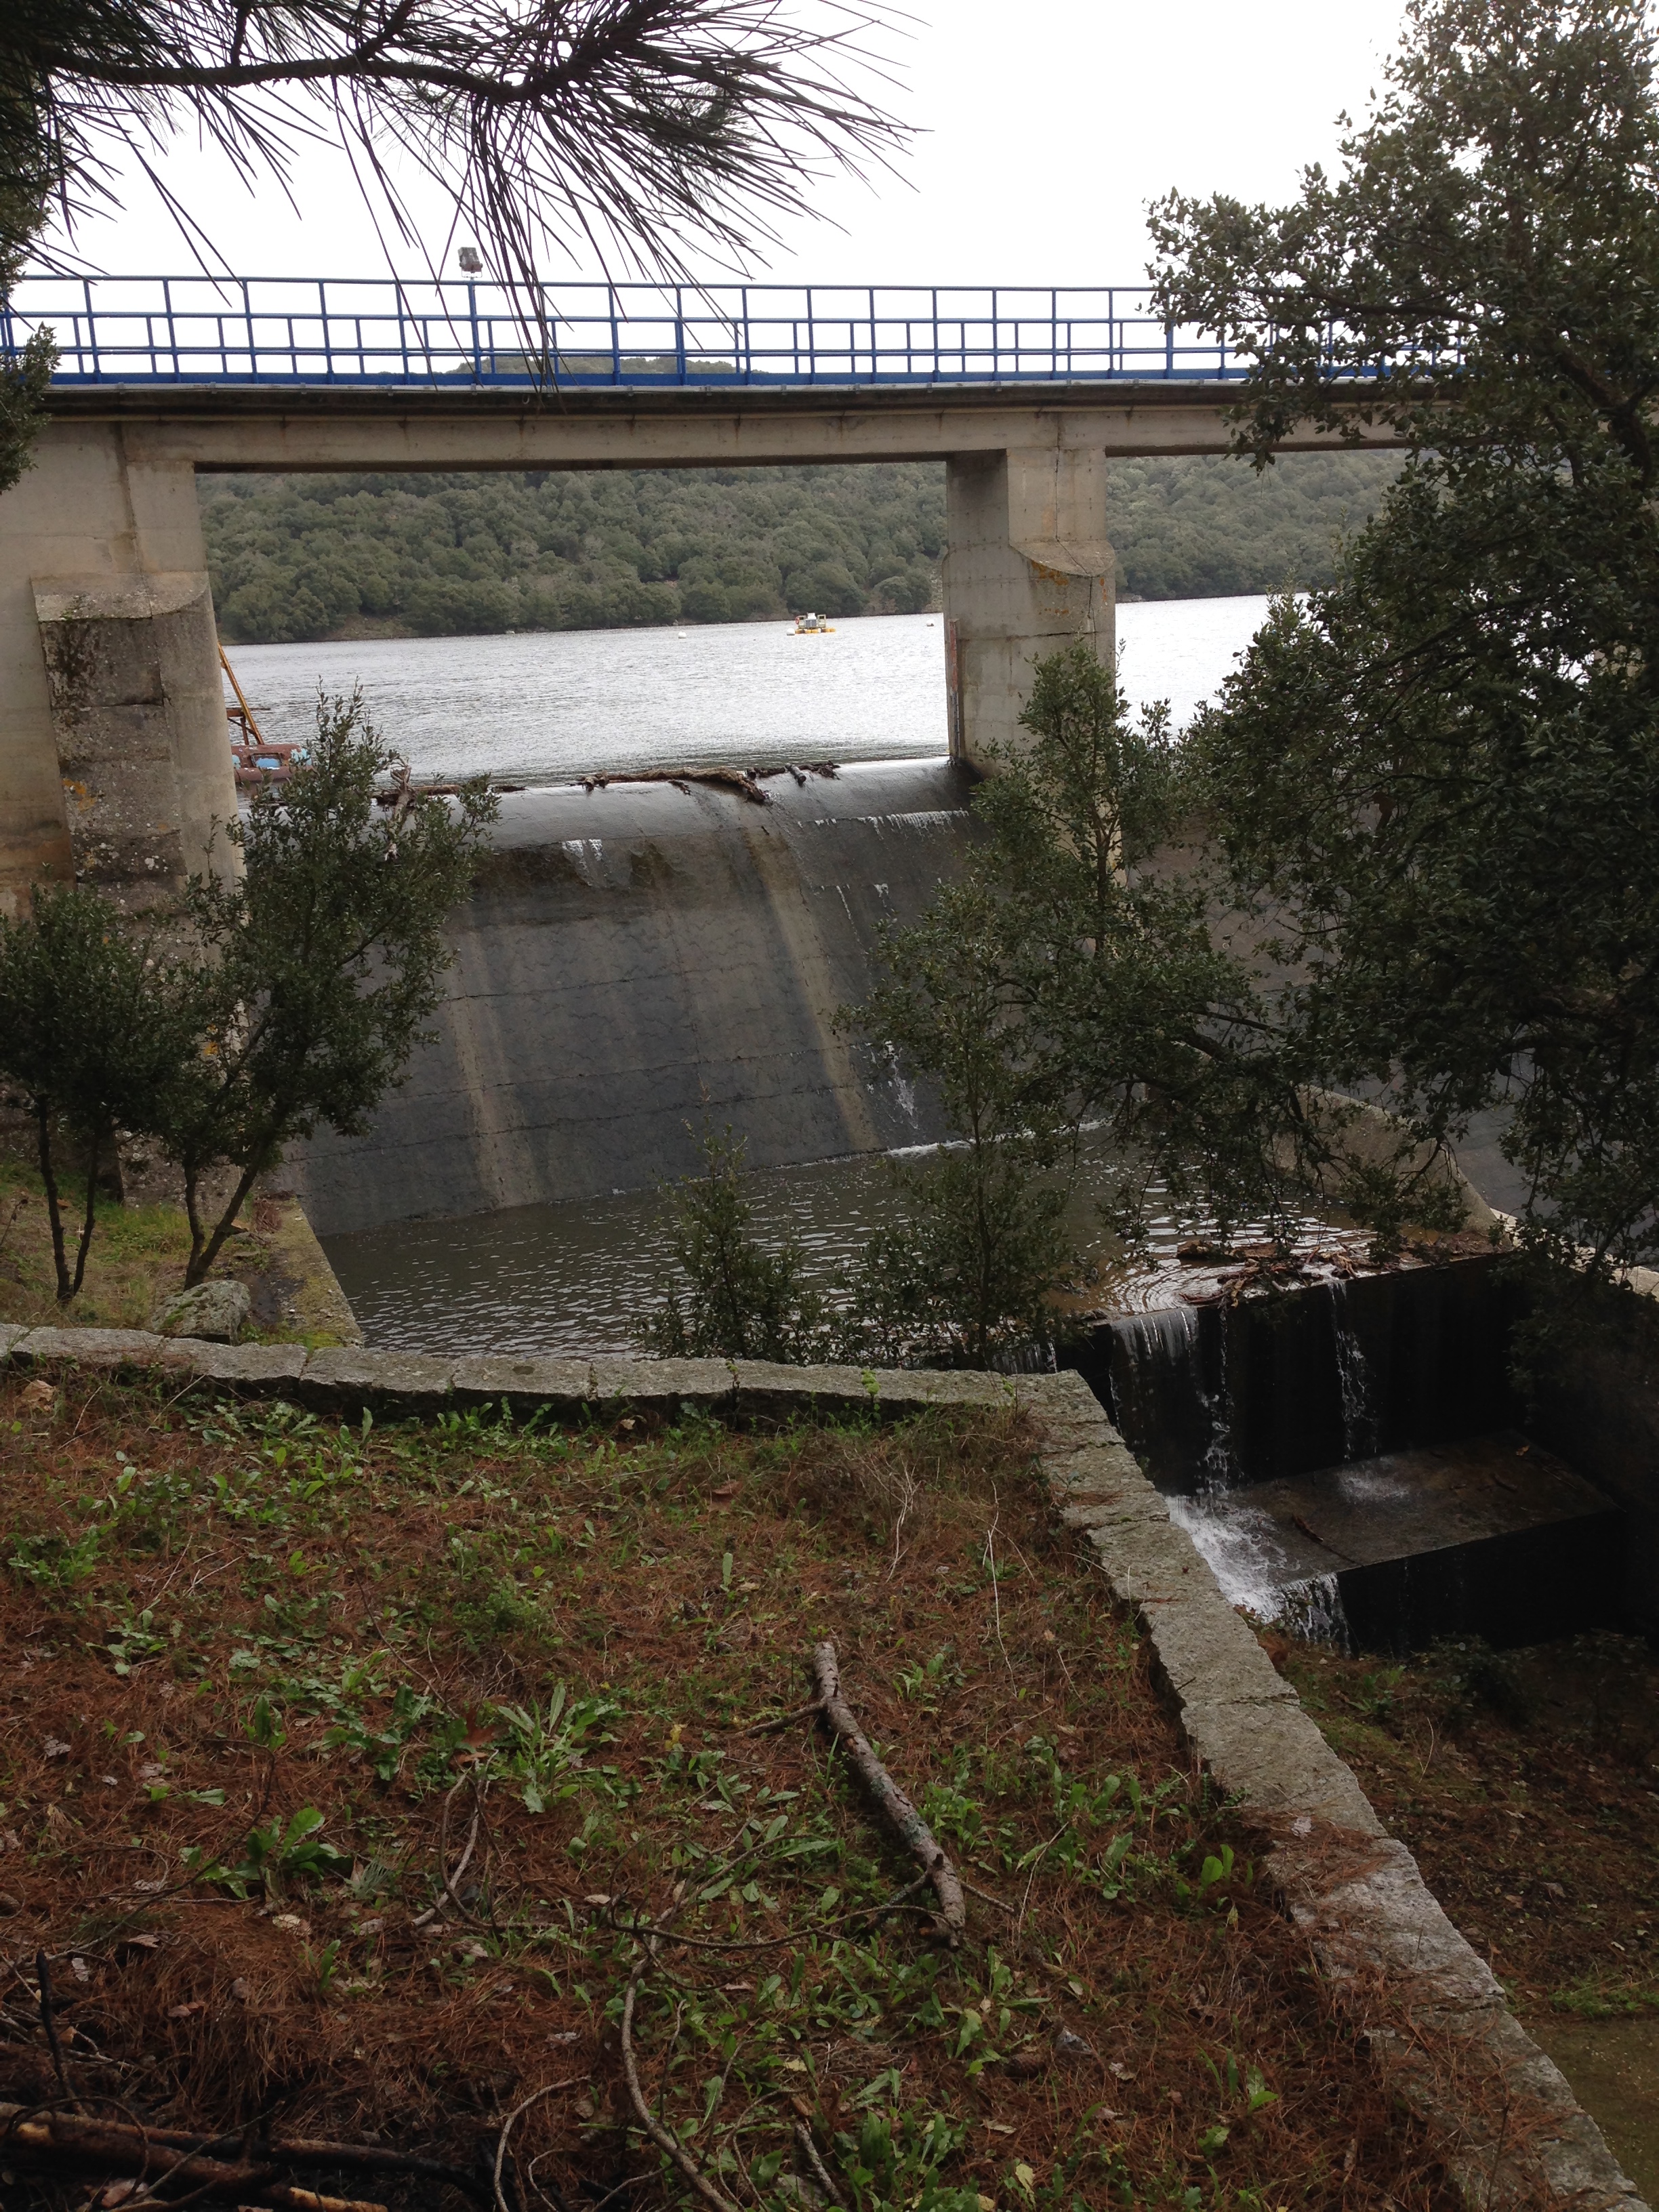 View of the dam